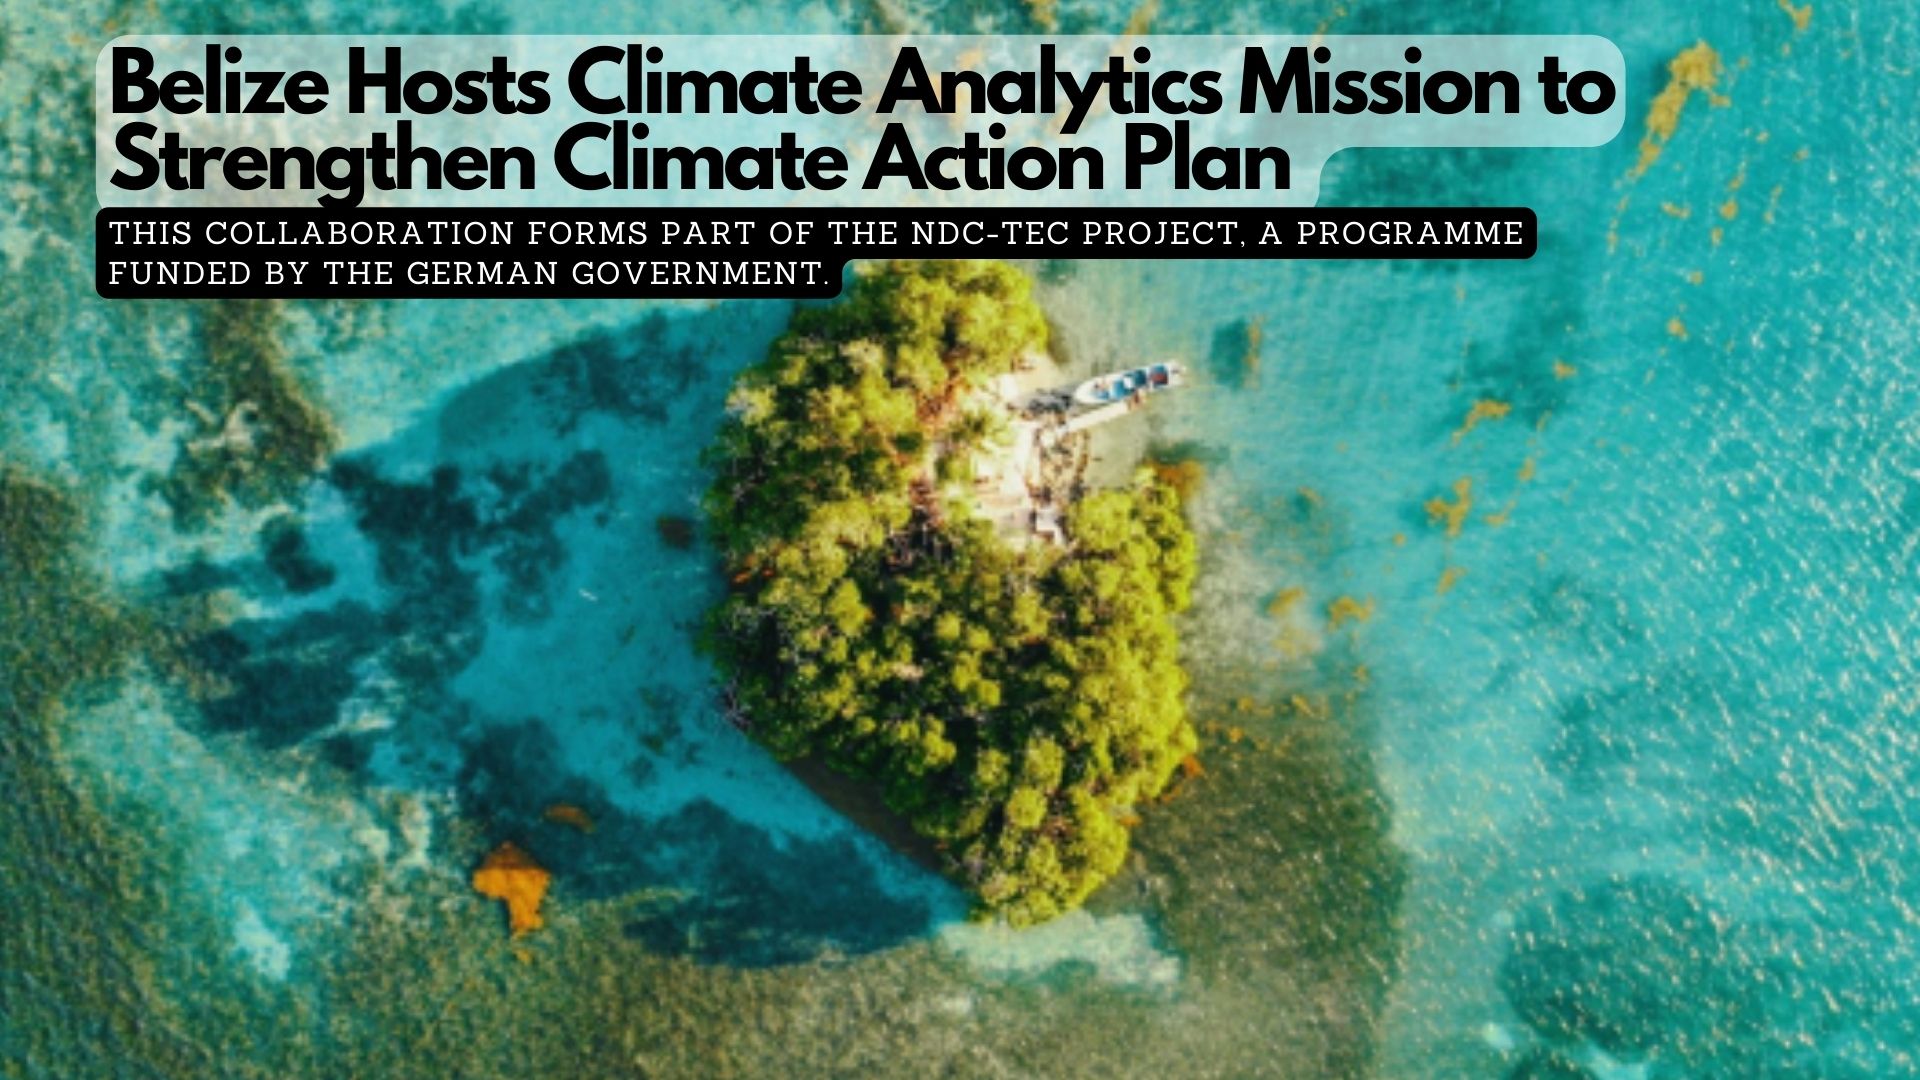 Belize Hosts Climate Analytics Mission to Strengthen Climate Action Plan